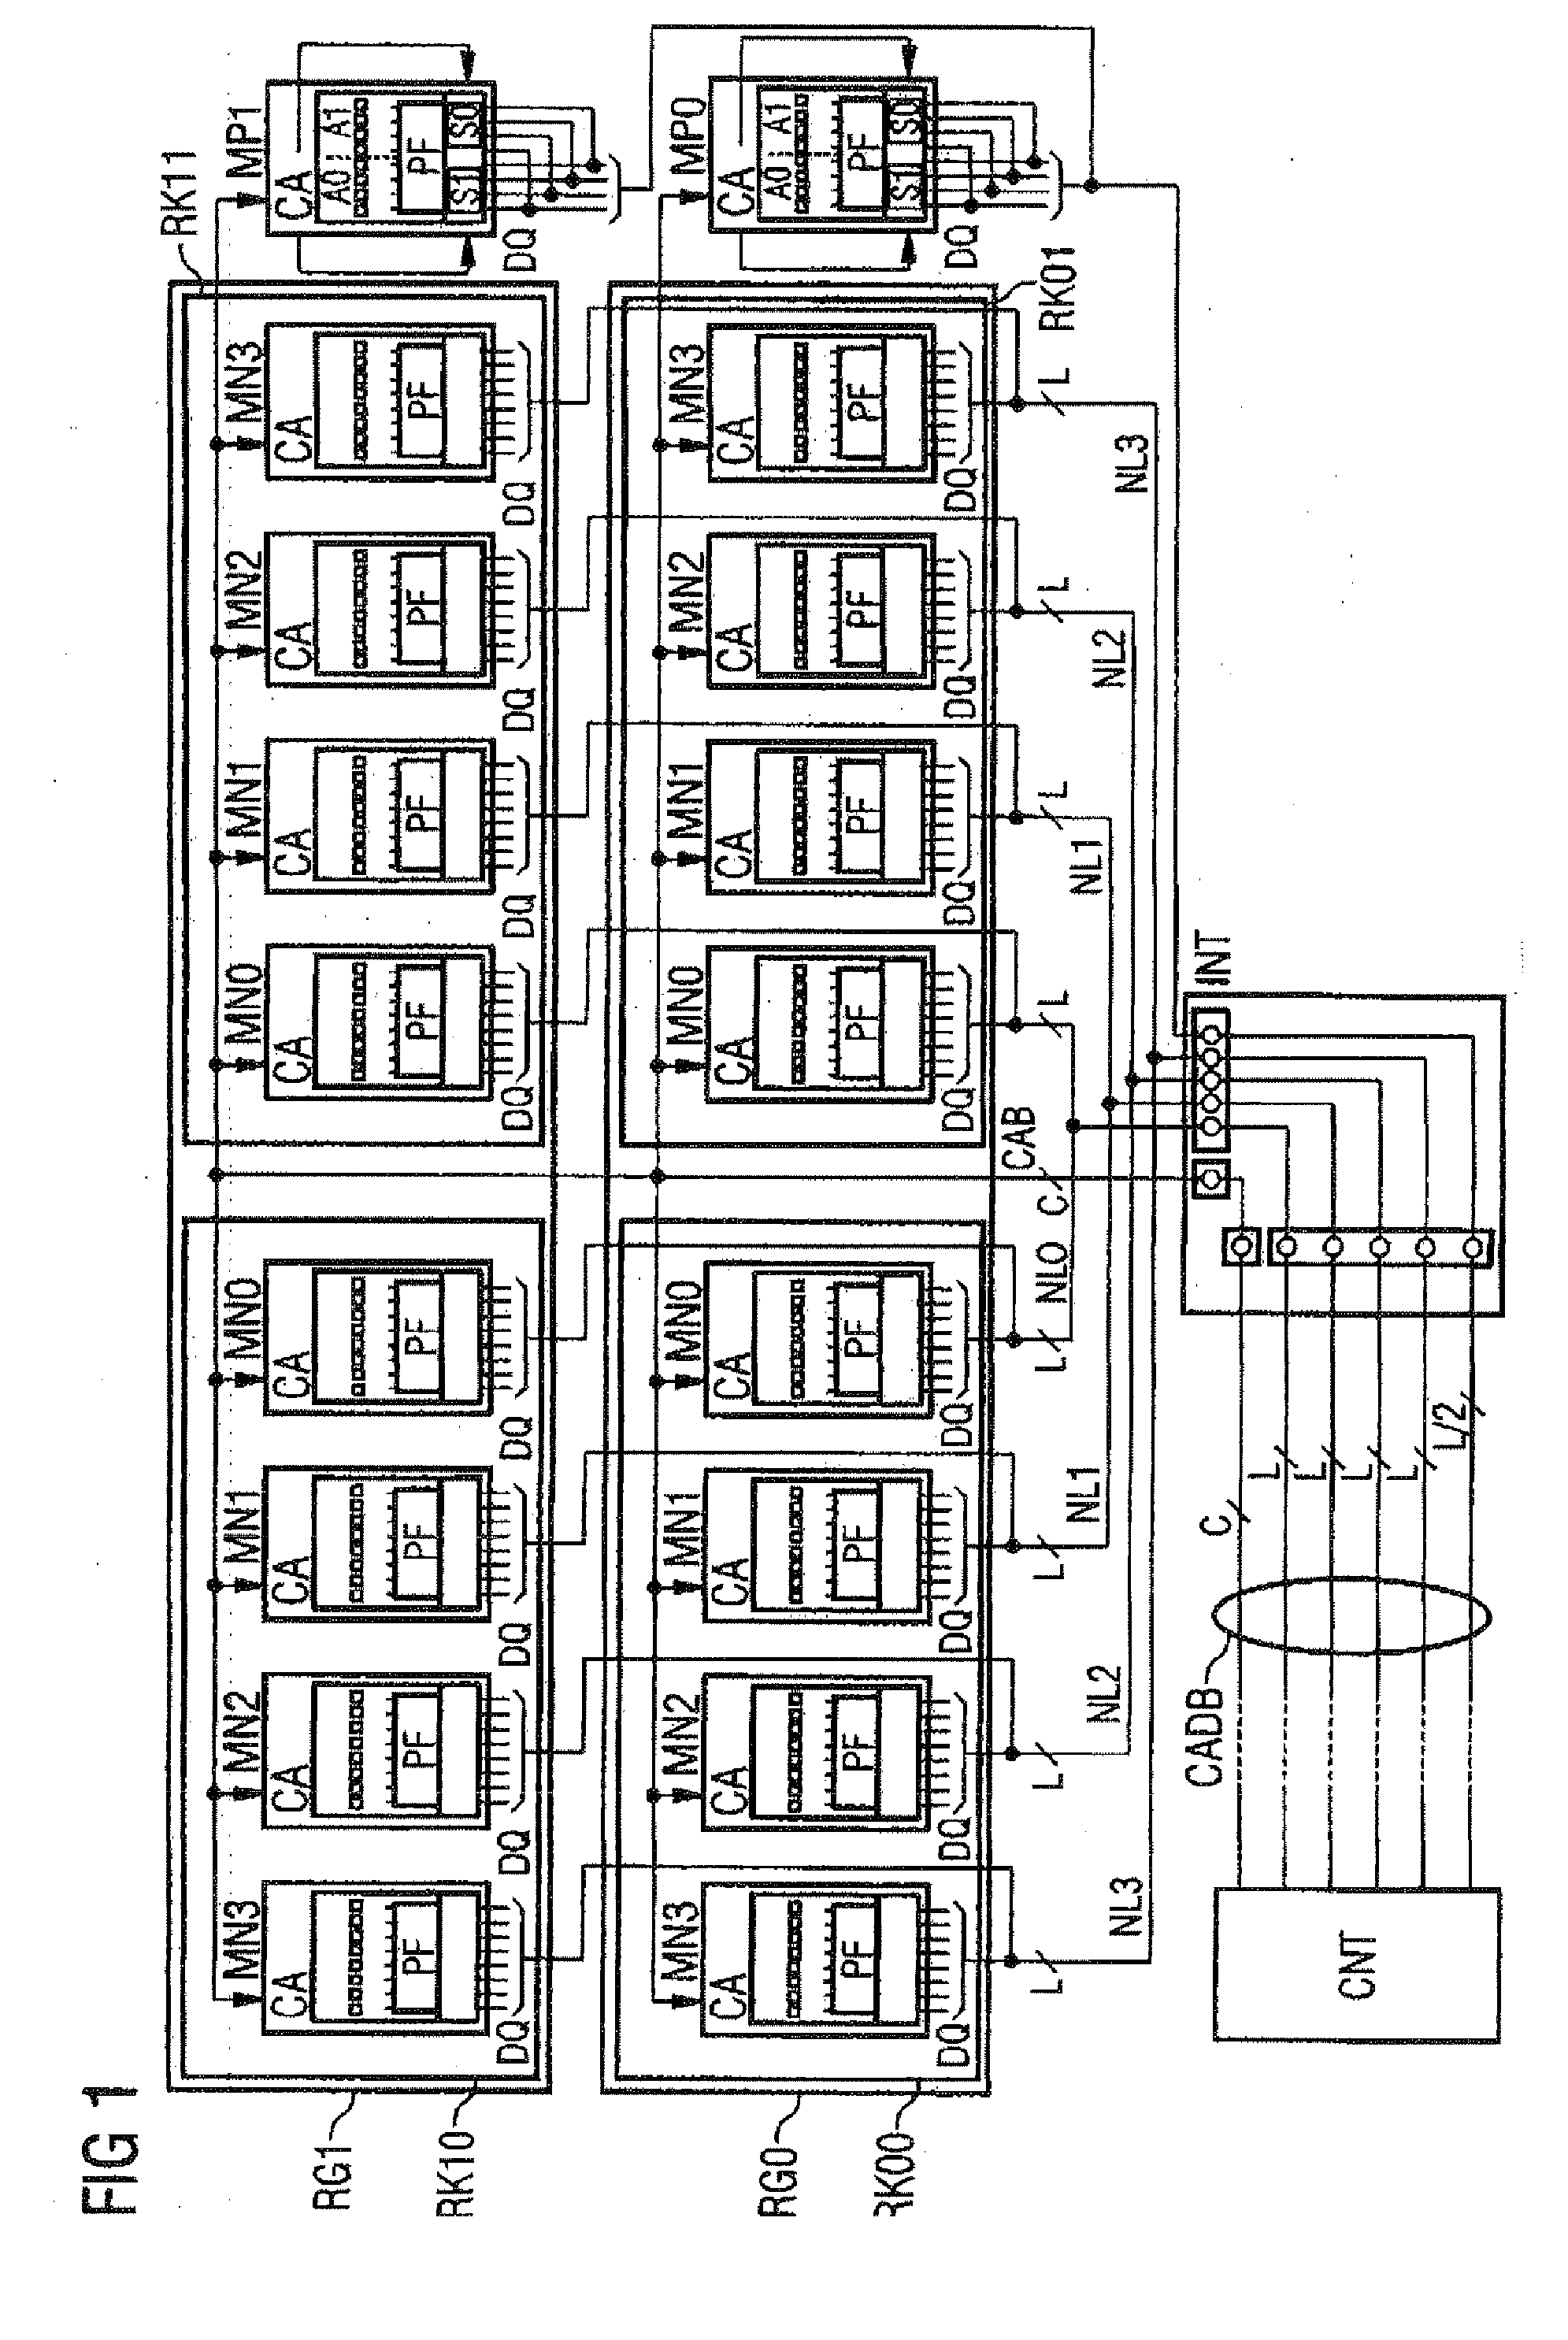 Memory module comprising a plurality of memory devices